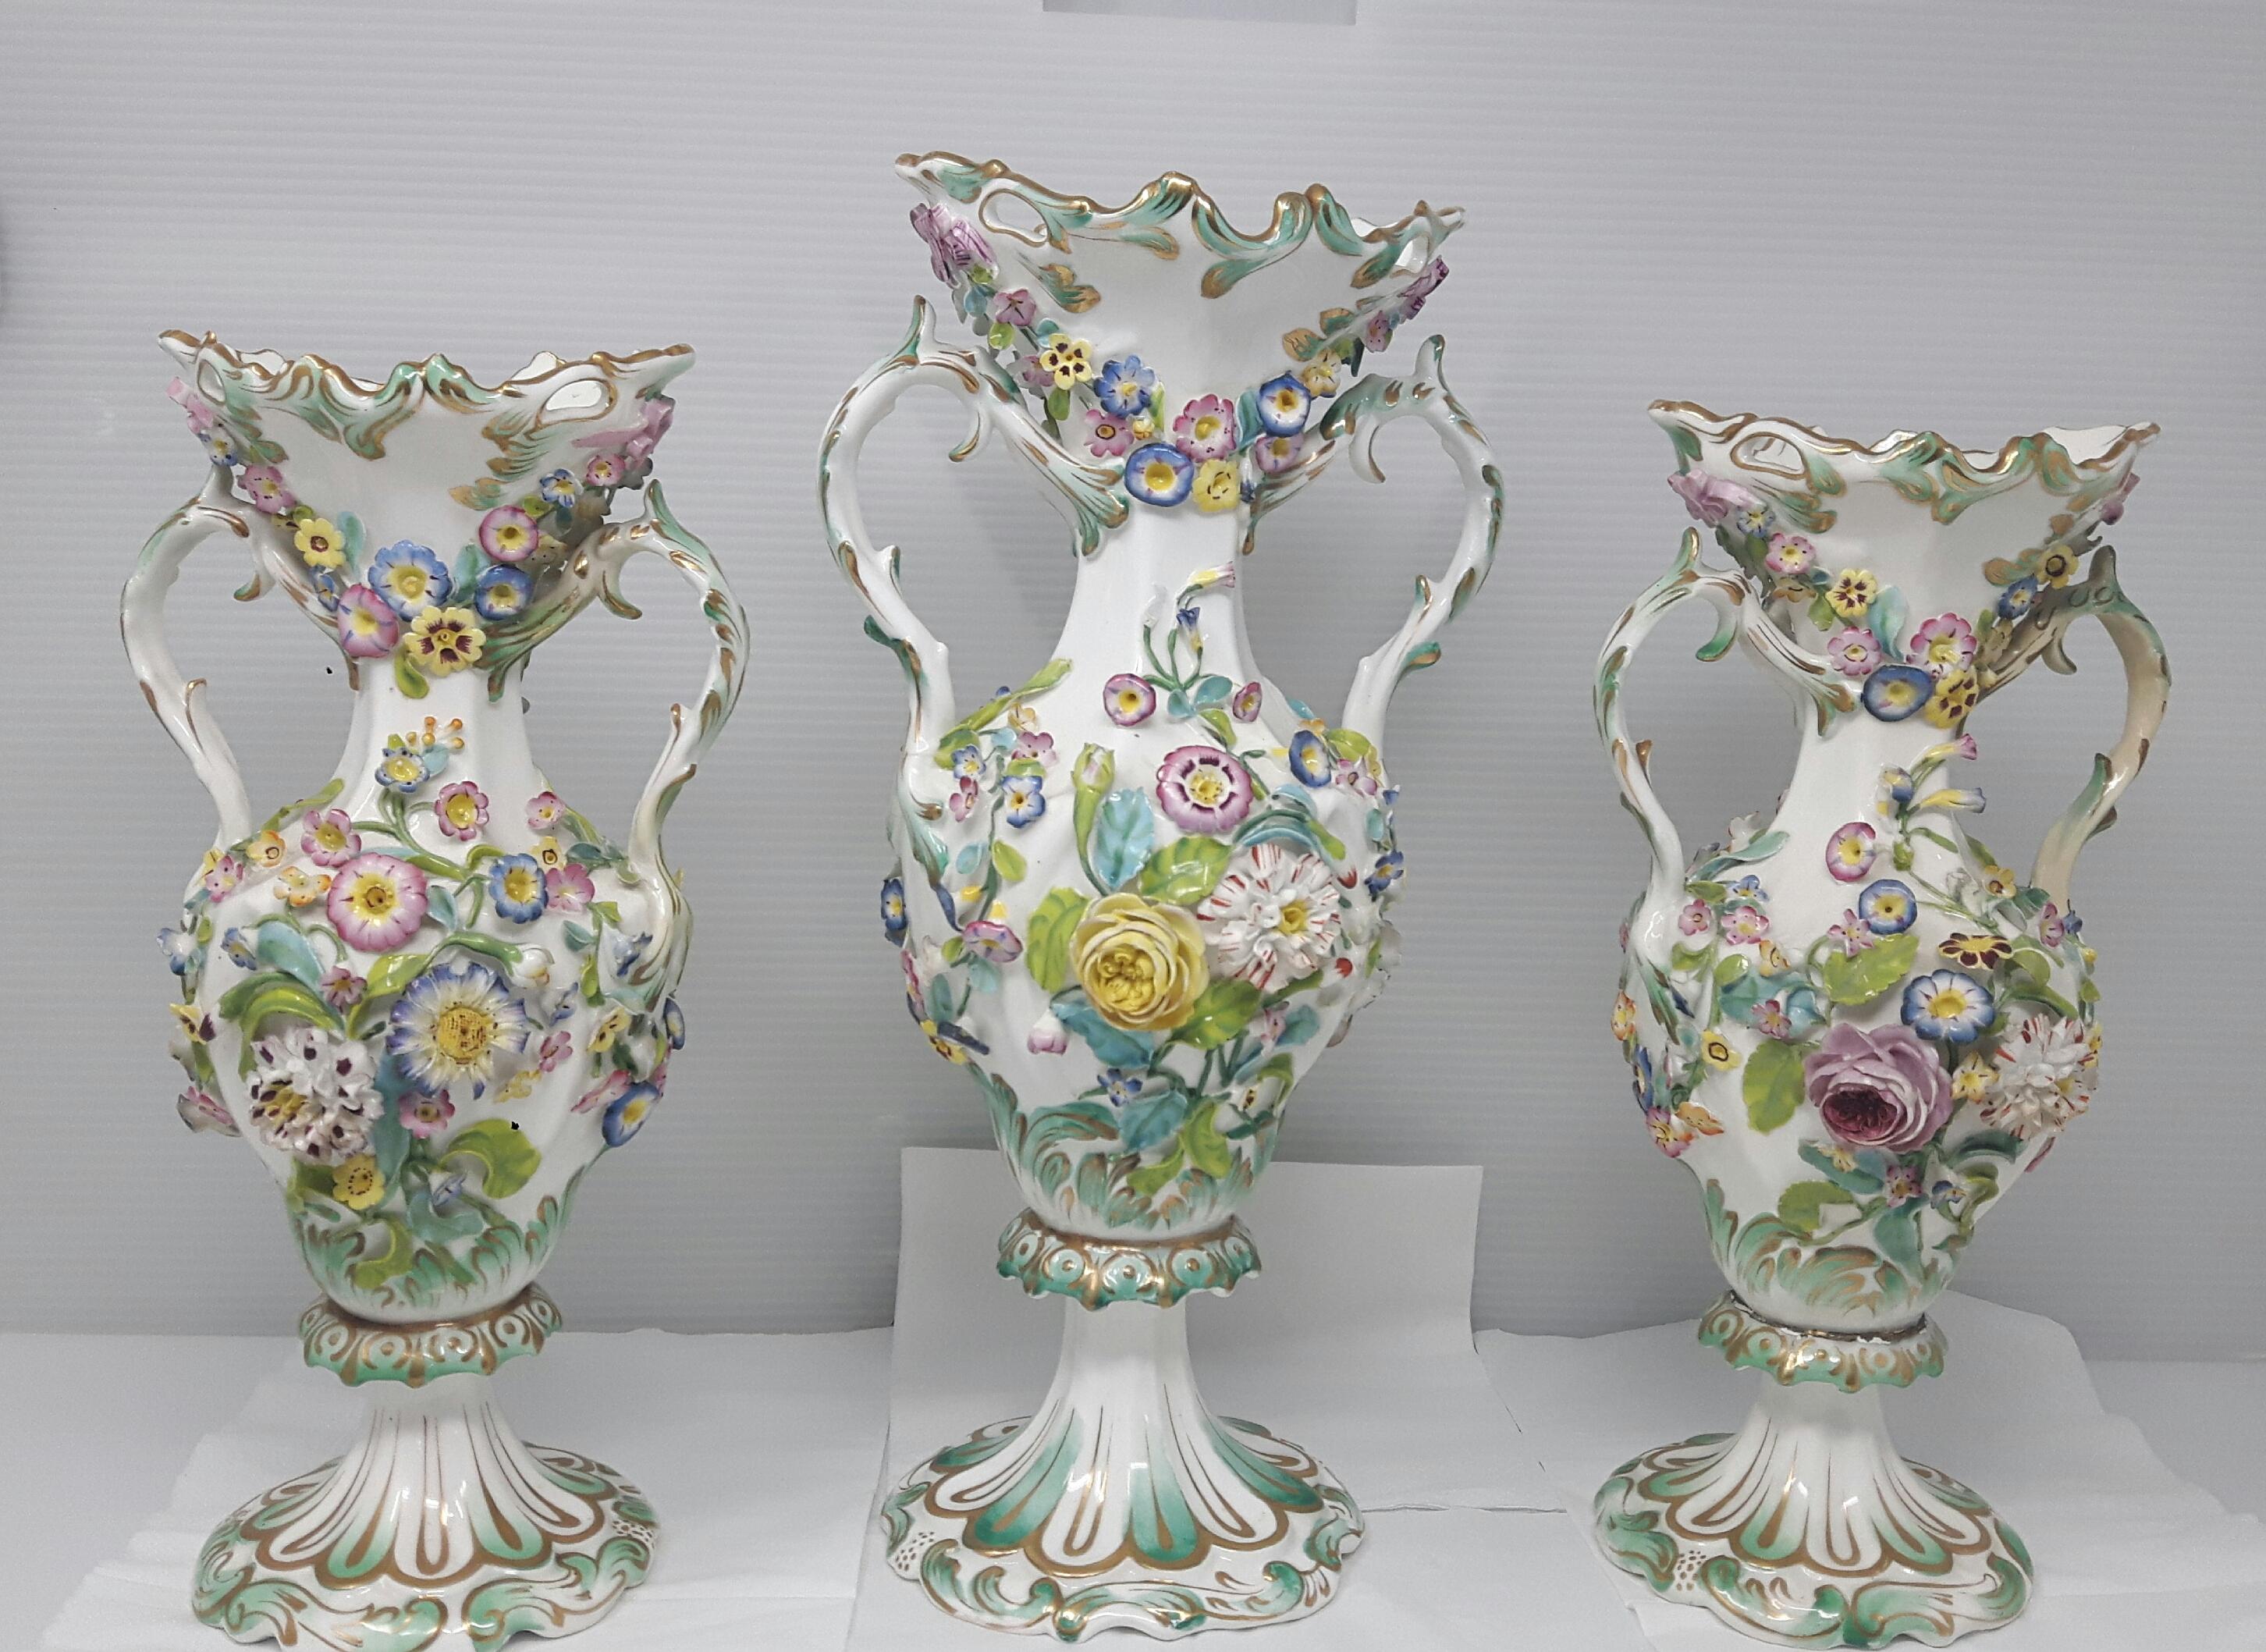 A garniture of Minton or Coalport vases, circa 1830, in the C18 Meissen style with appliqué handmade ceramic flowers encrusted all-over.
 